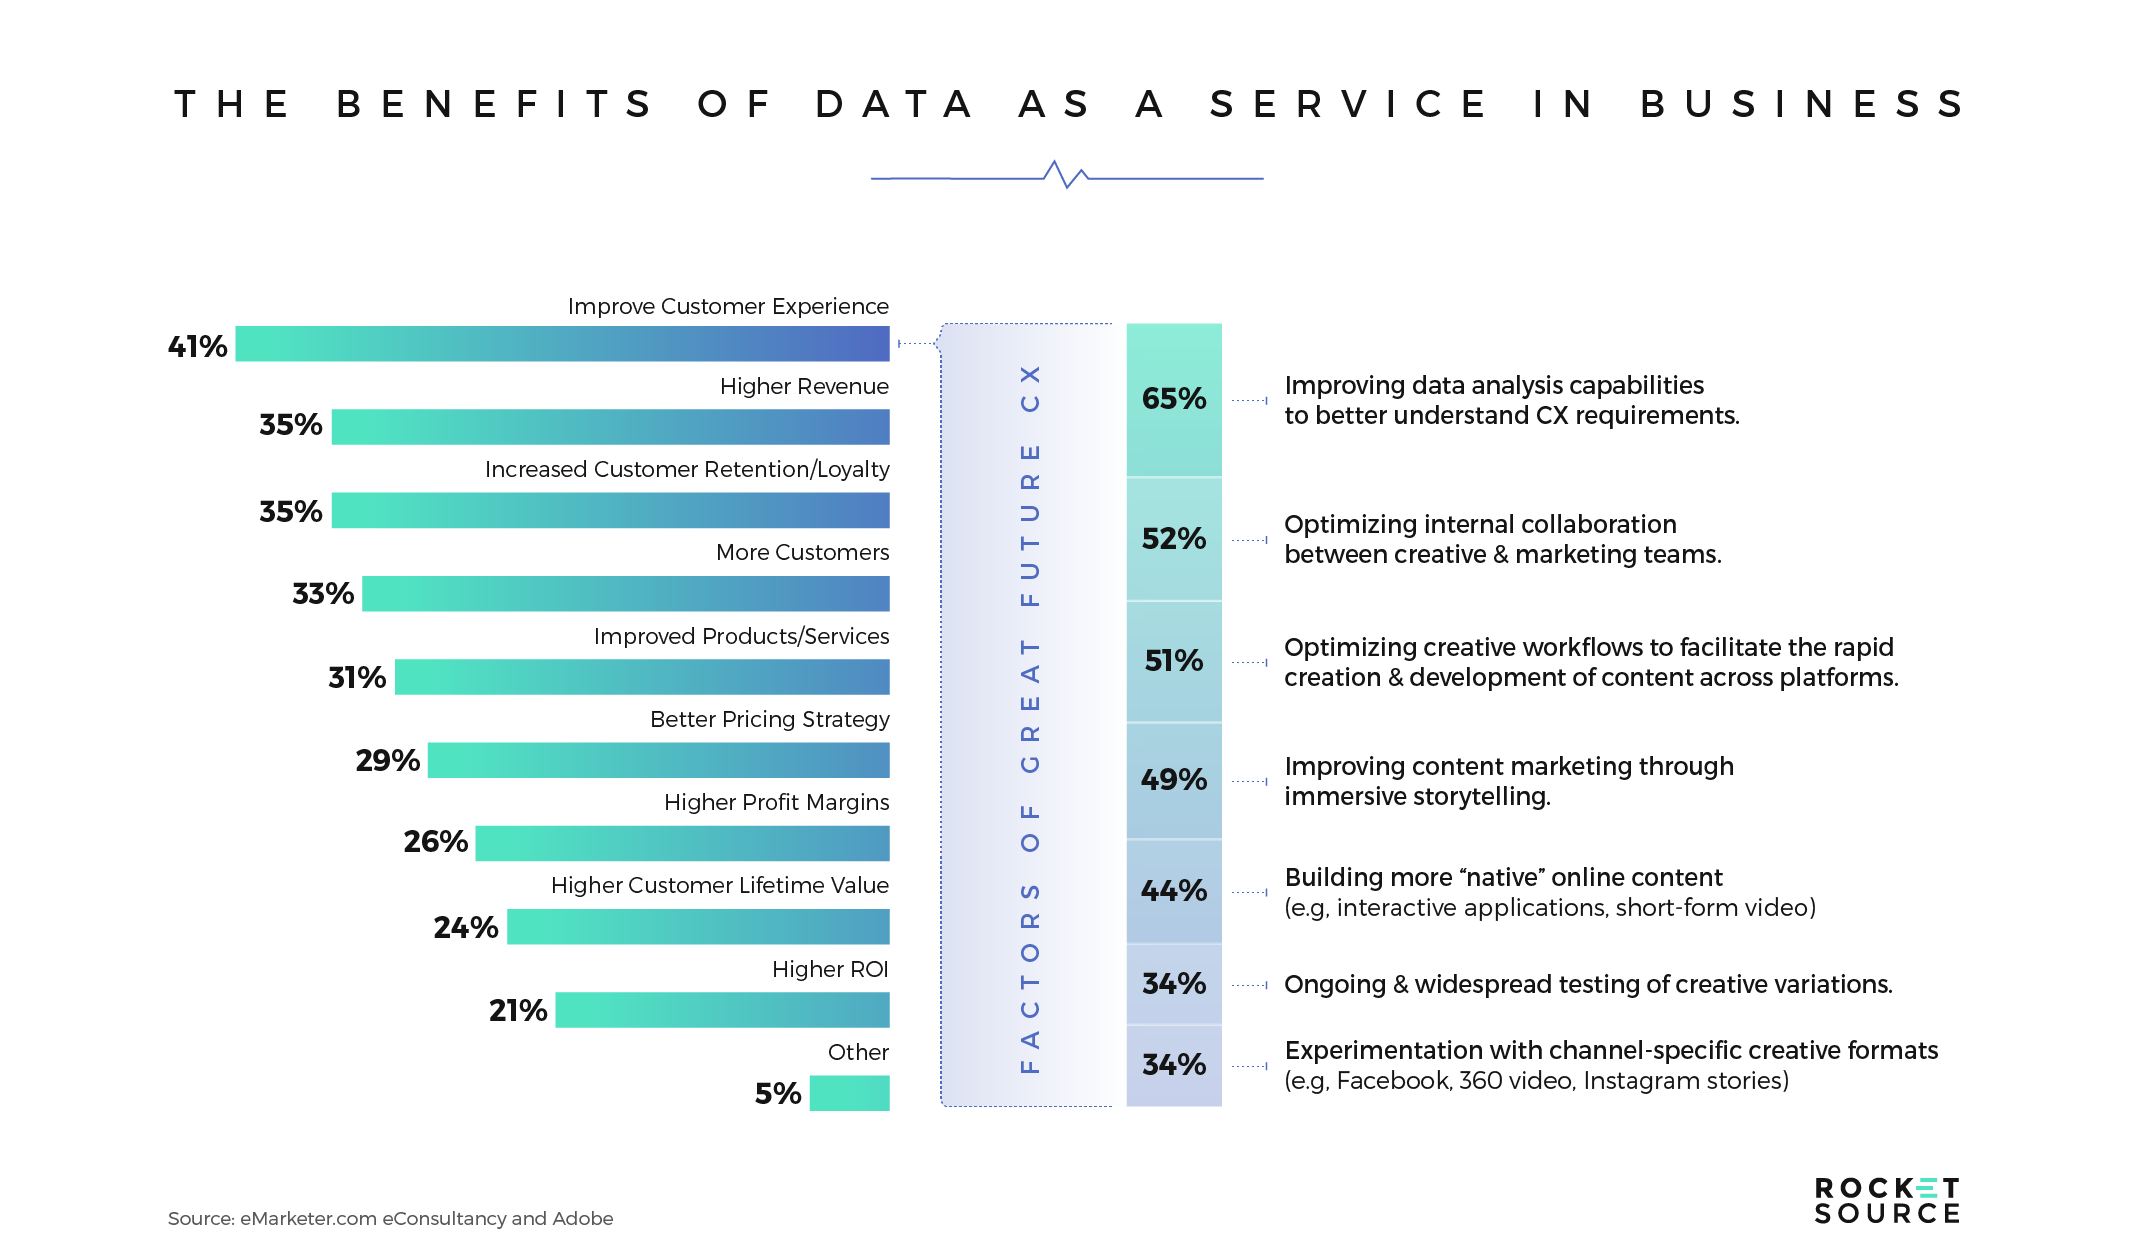 Benefits of Data as a Service in Business